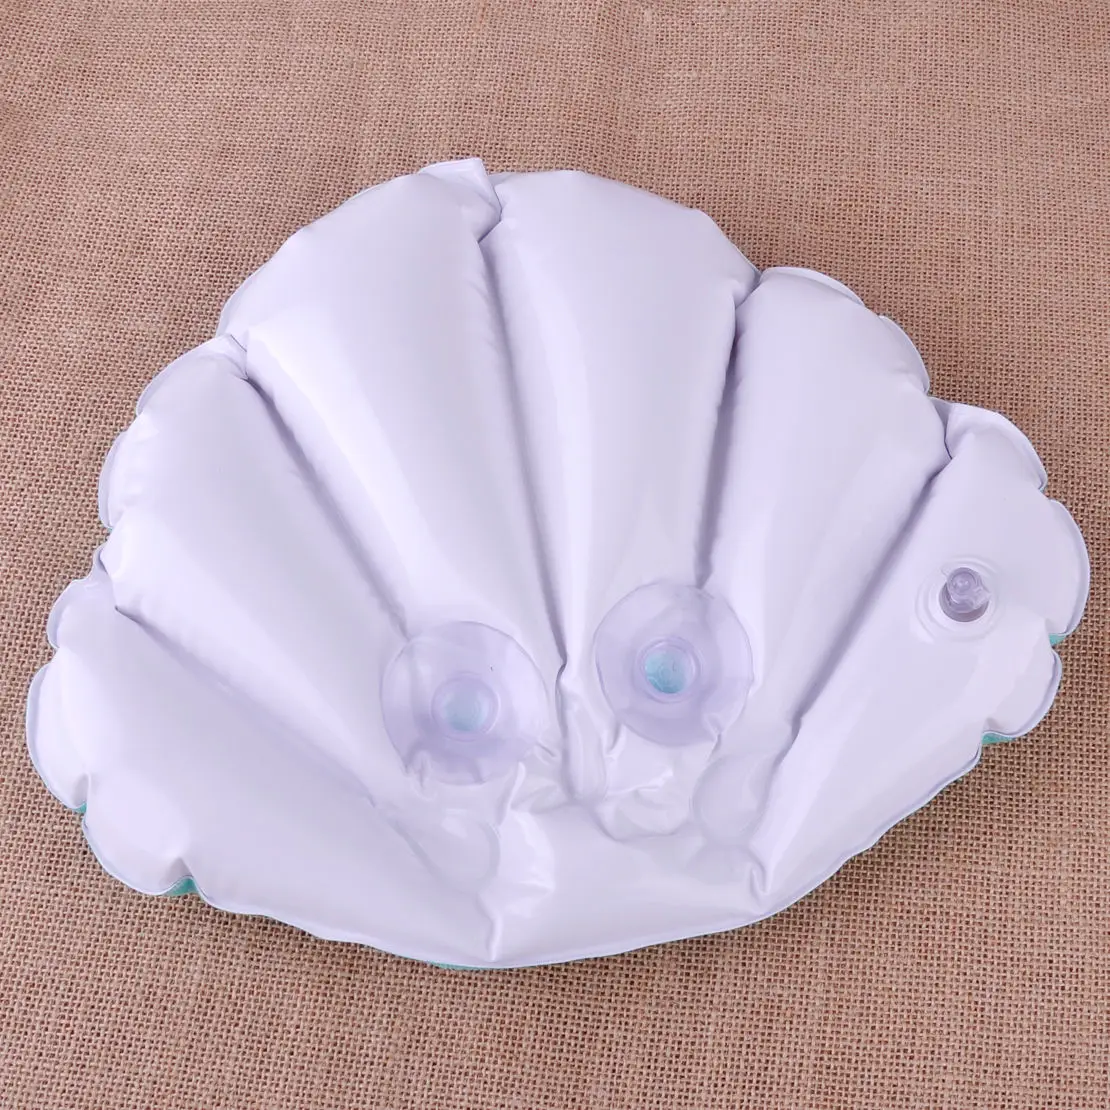 Newest Hot Soft Home Spa Bathroom Inflatable Shell Shaped Bathing Pillow Head Back Neck Cushion Bathtub Rest Relaxing